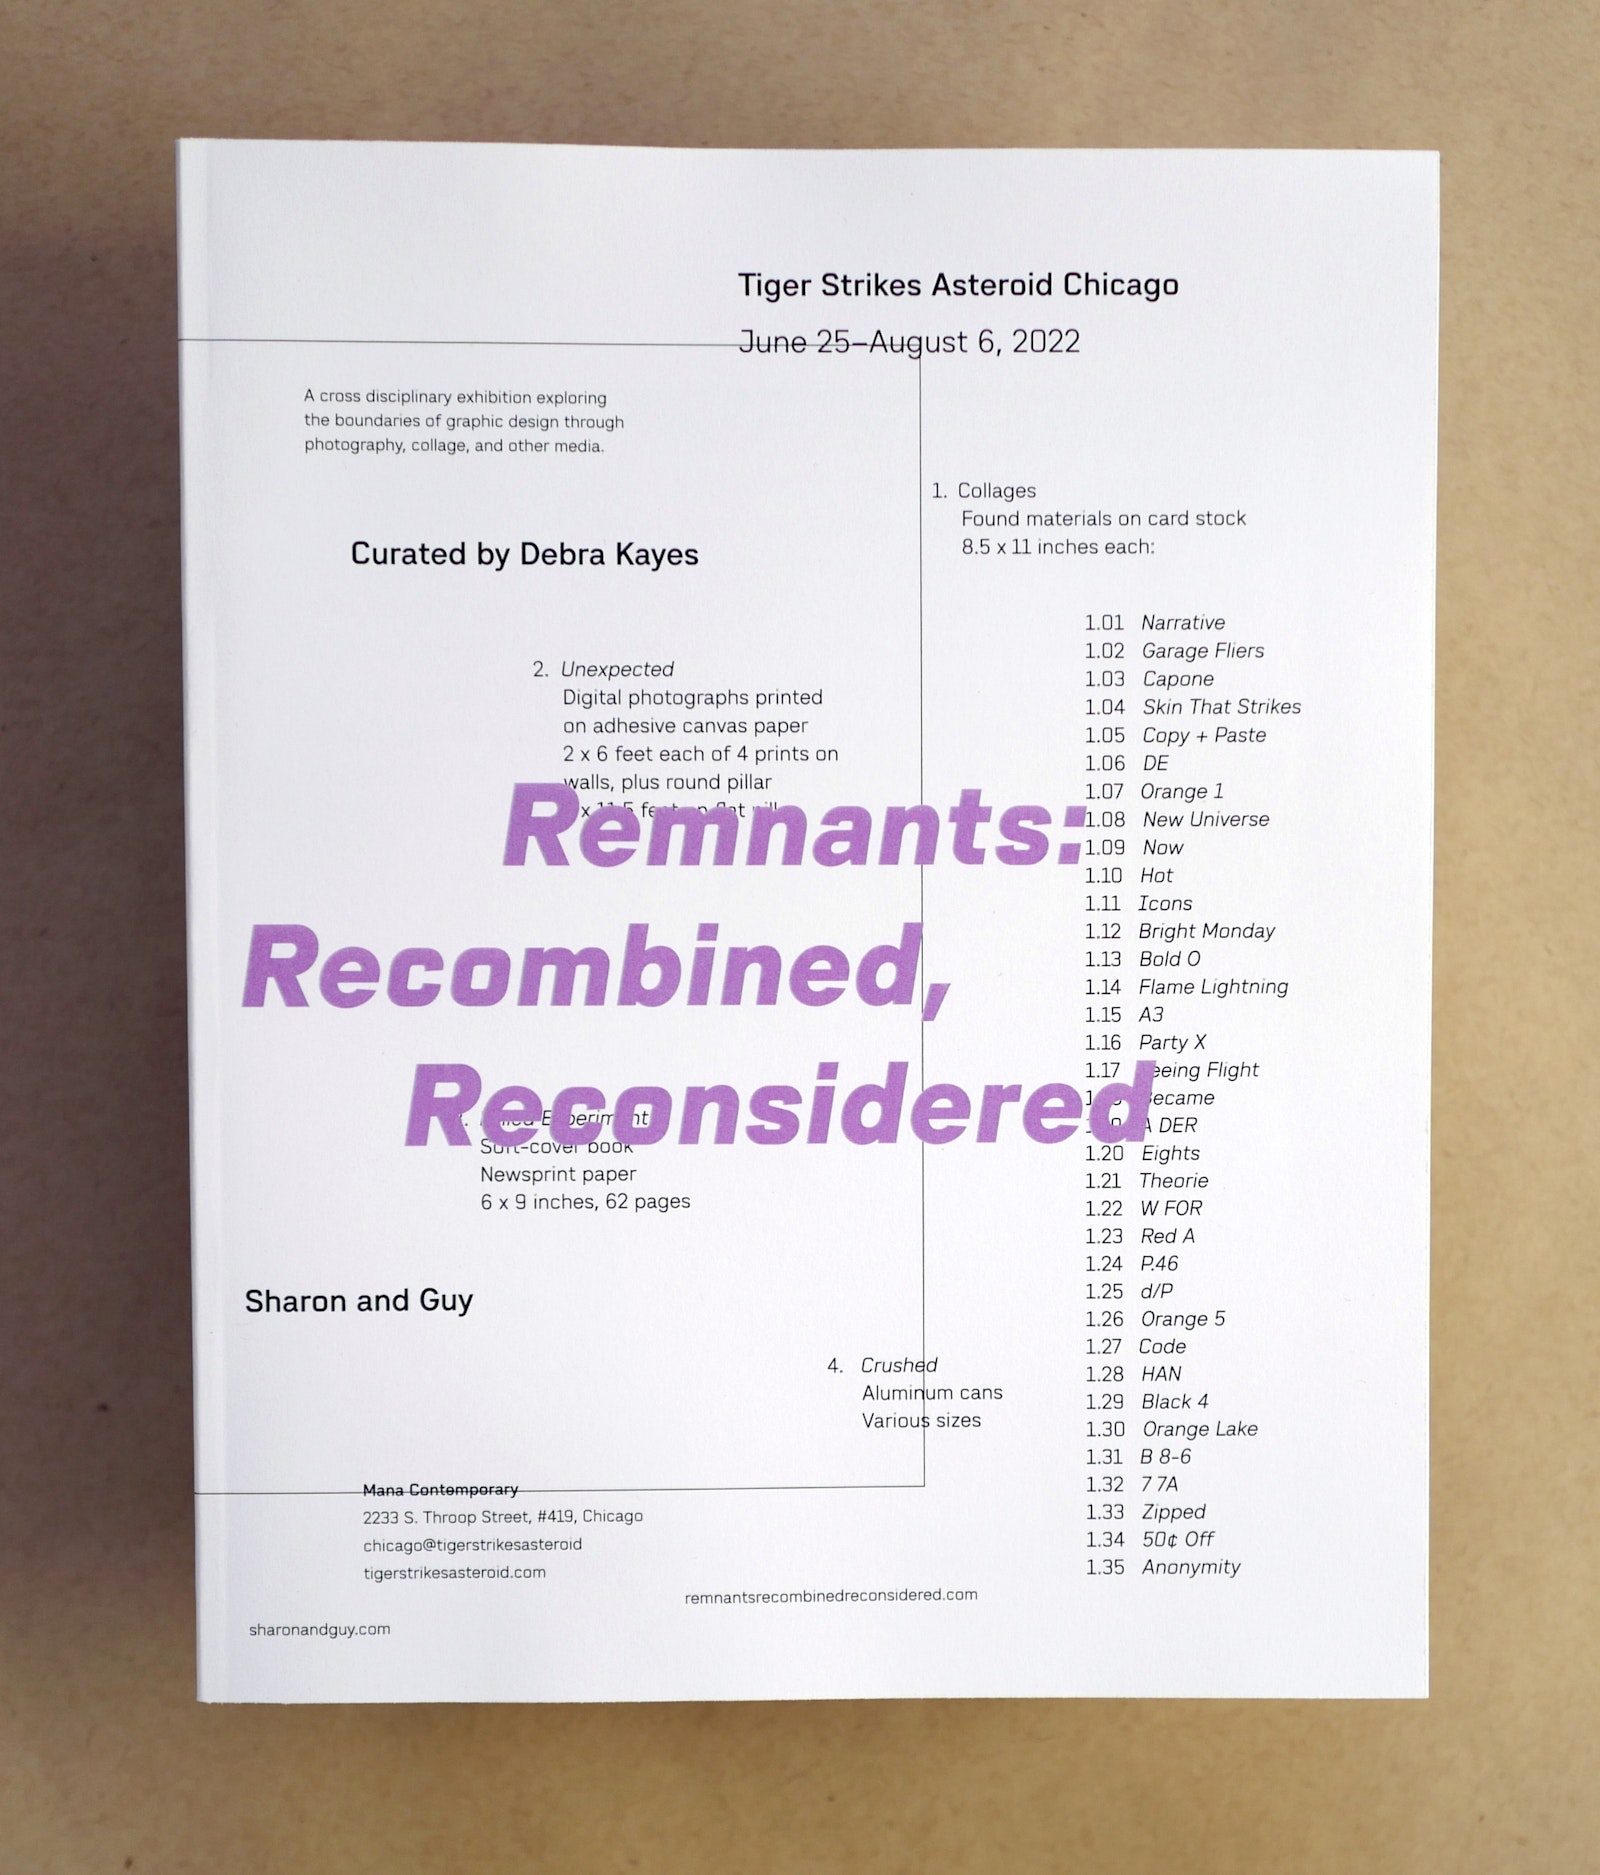 Remnants: Recombined, Reconsidered